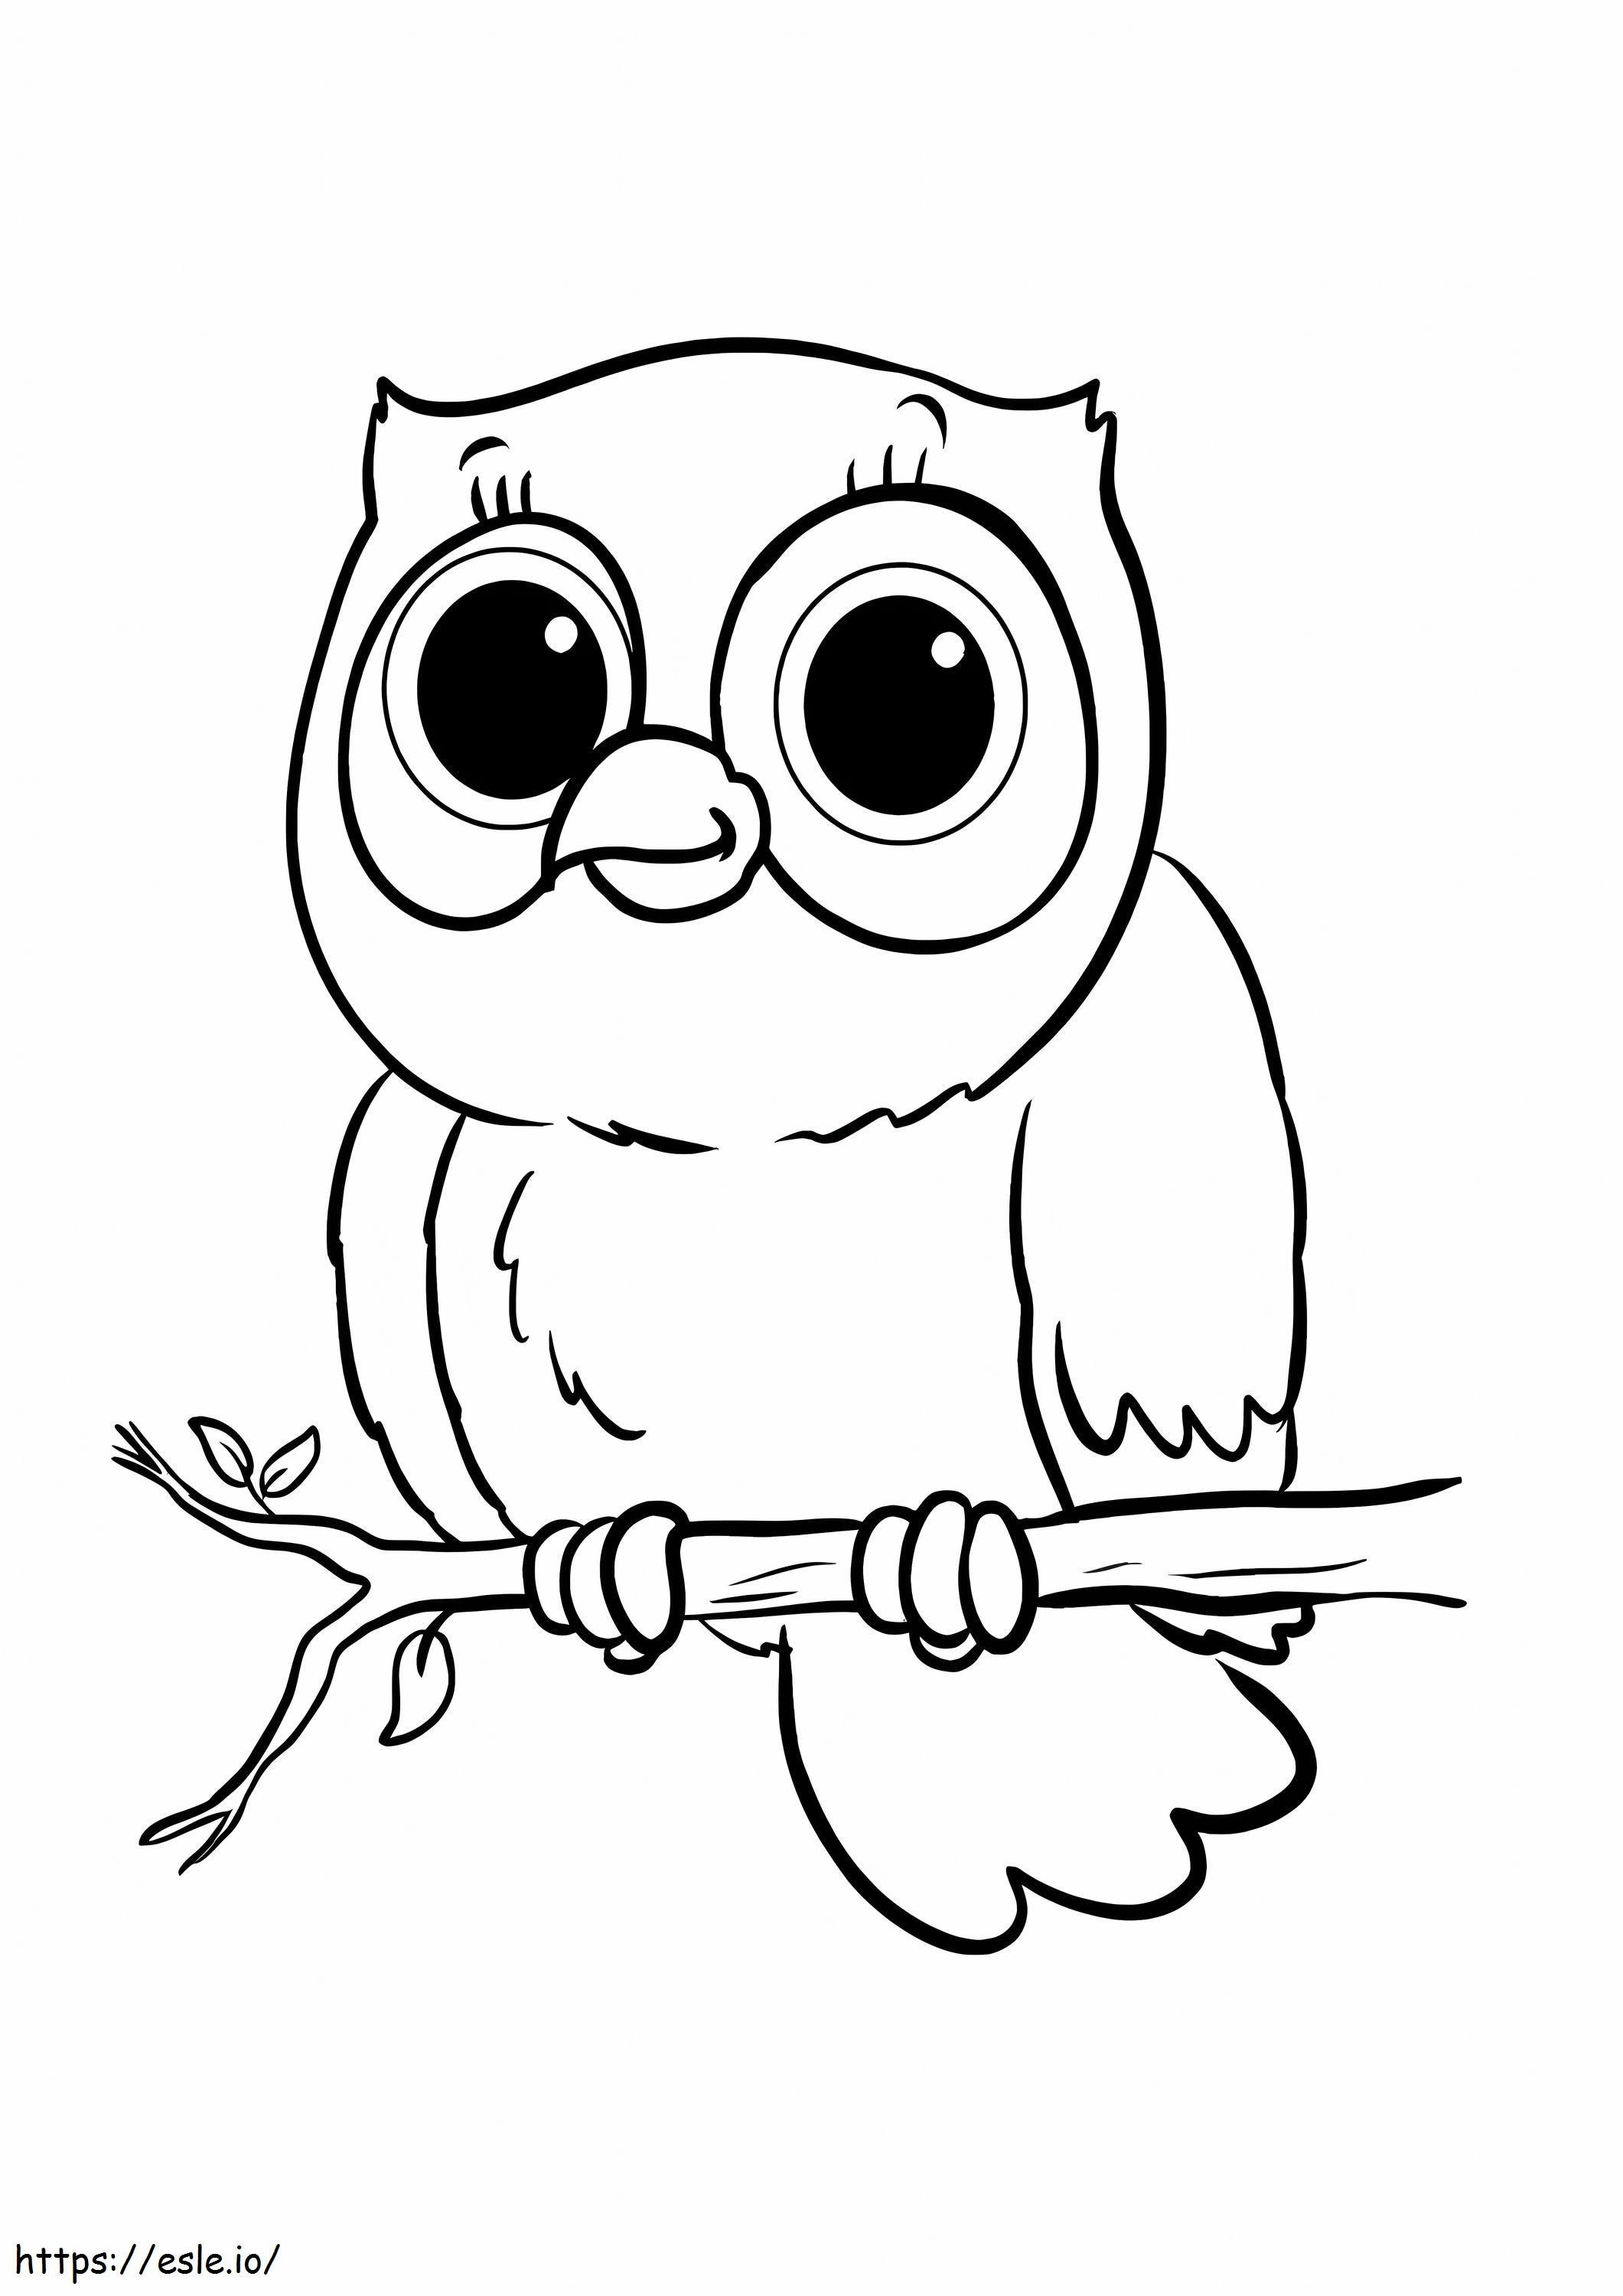 Cute Owl On Tree Branch coloring page